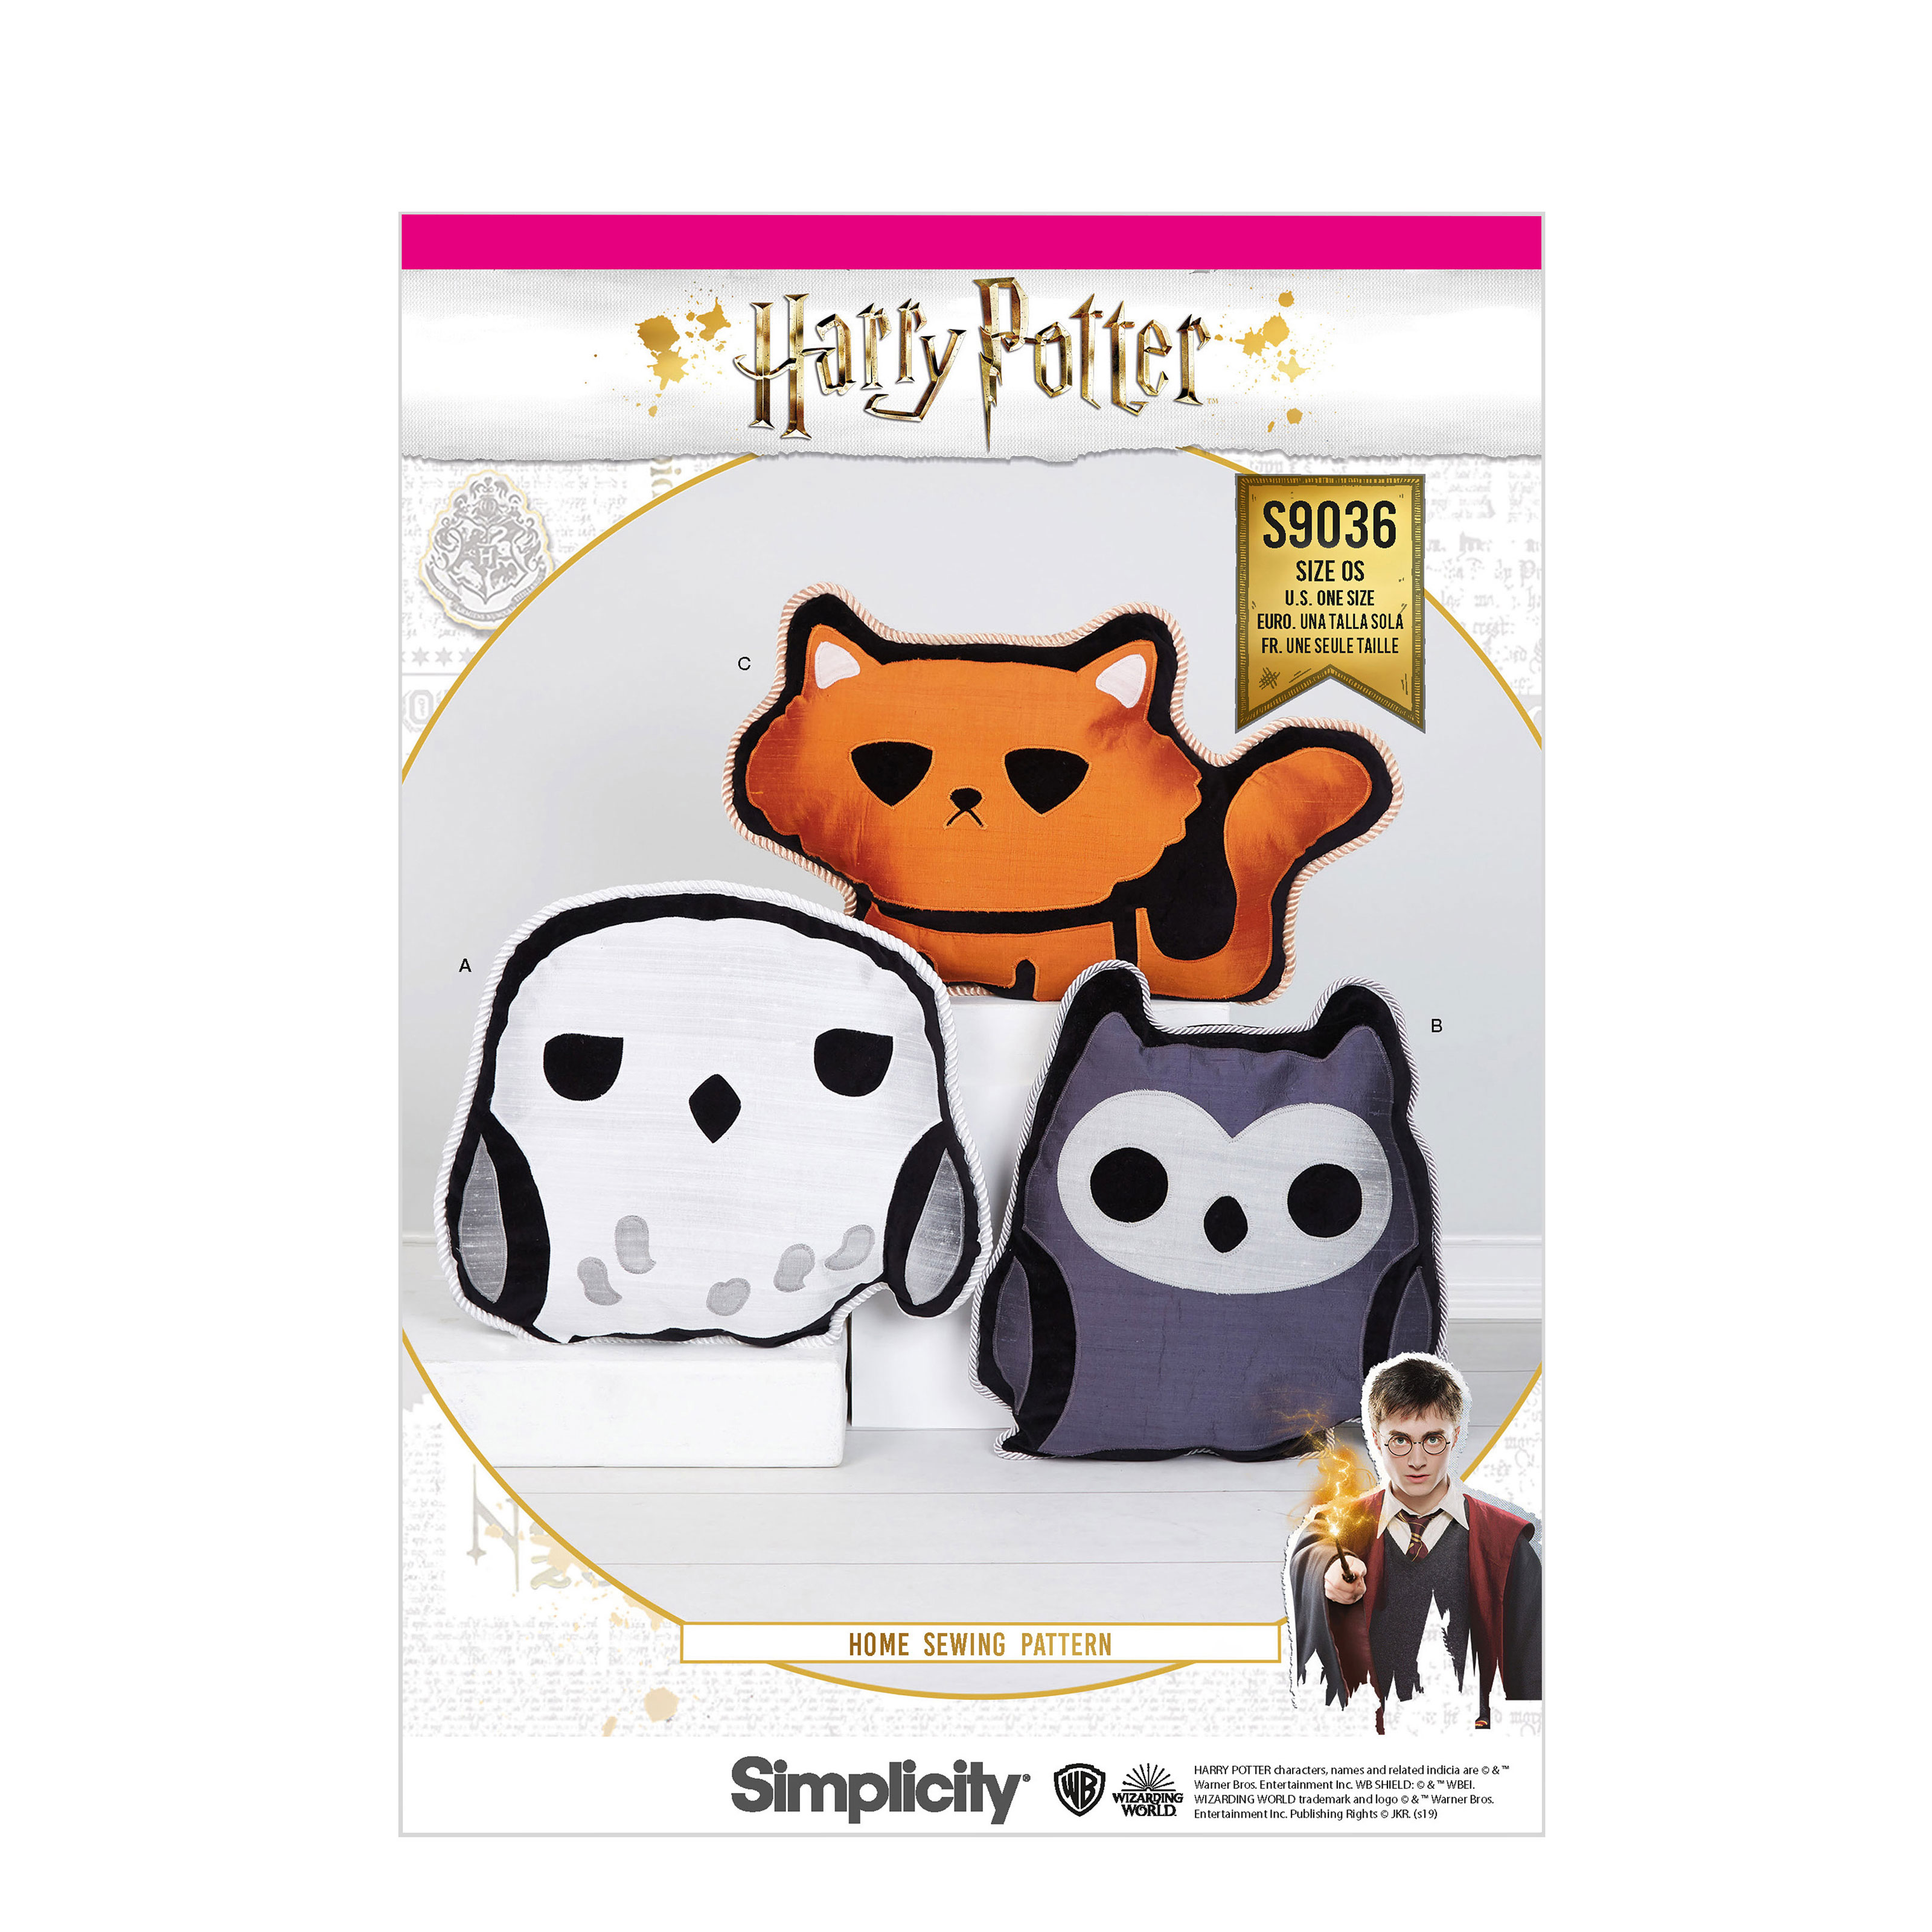 Simplicity S9036 Harry Potter Stuffed Animal Pillow Sewing Pattern